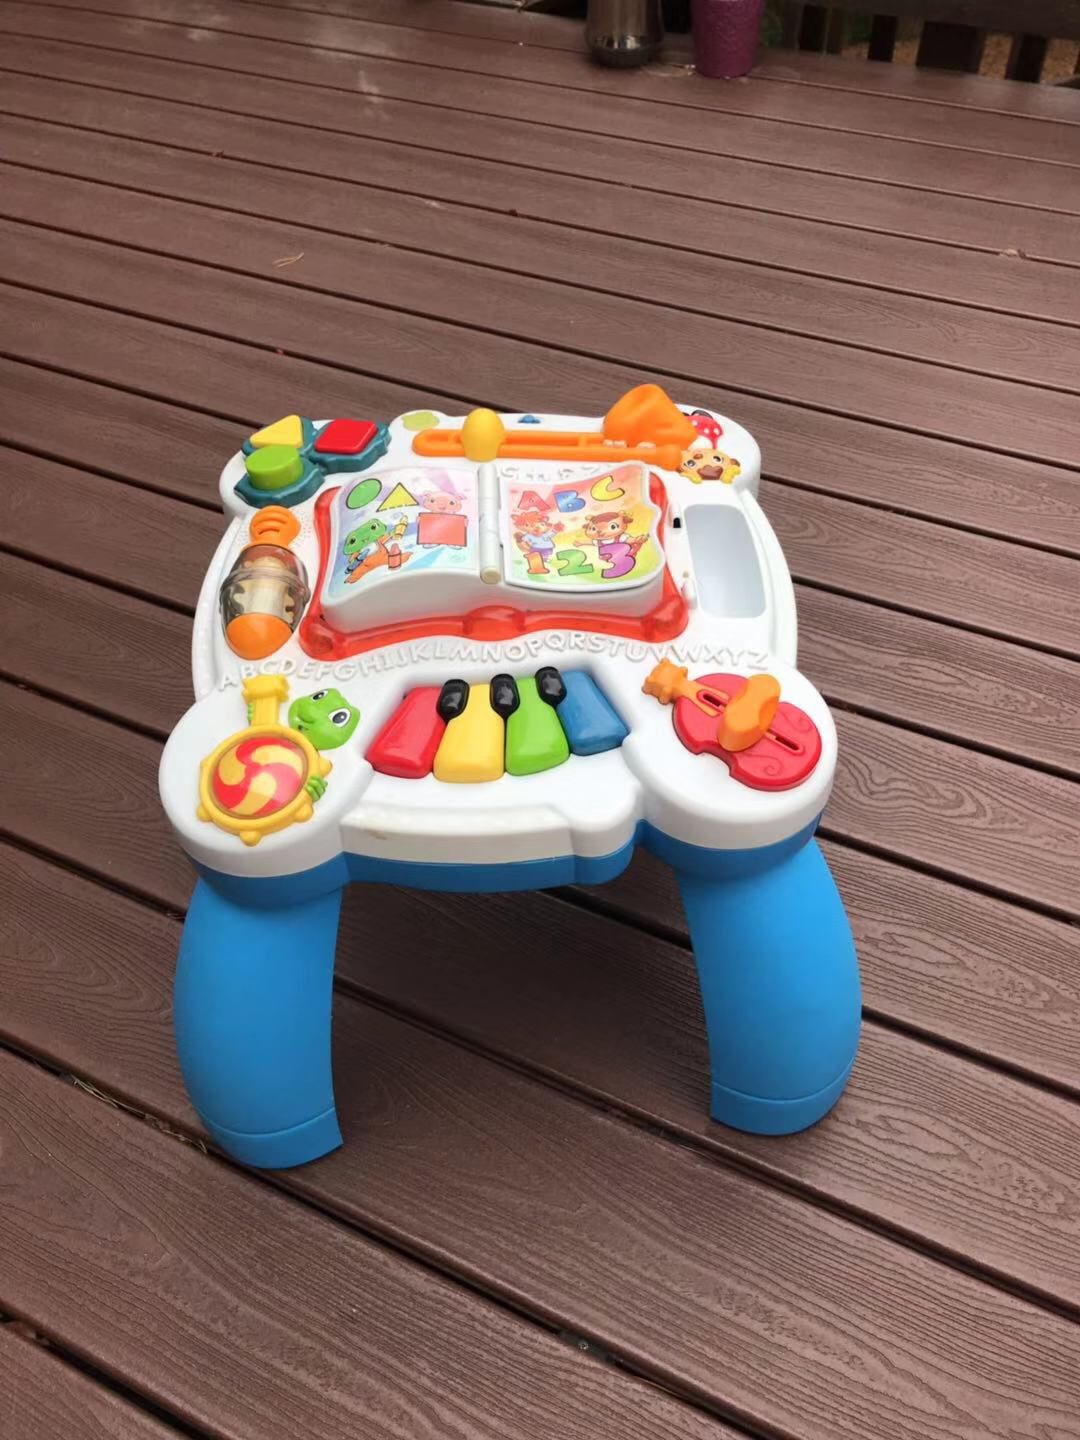 Small music table for little kids. One part is missing, others are good.